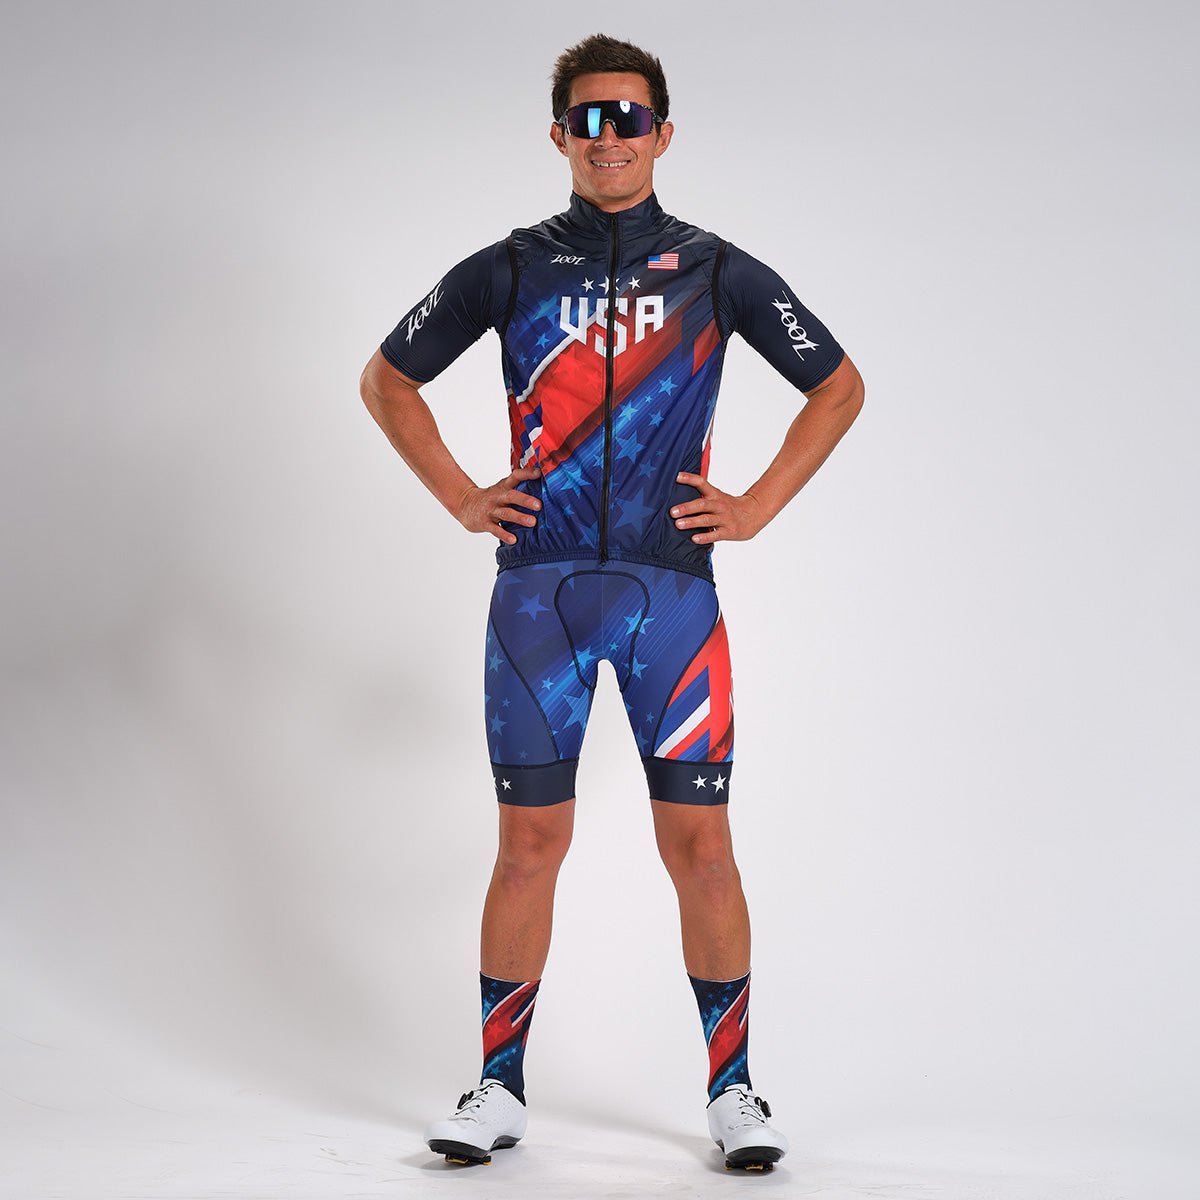 Zoot Sports CYCLE BOTTOMS MENS LTD CYCLE VEST - TEAM USA